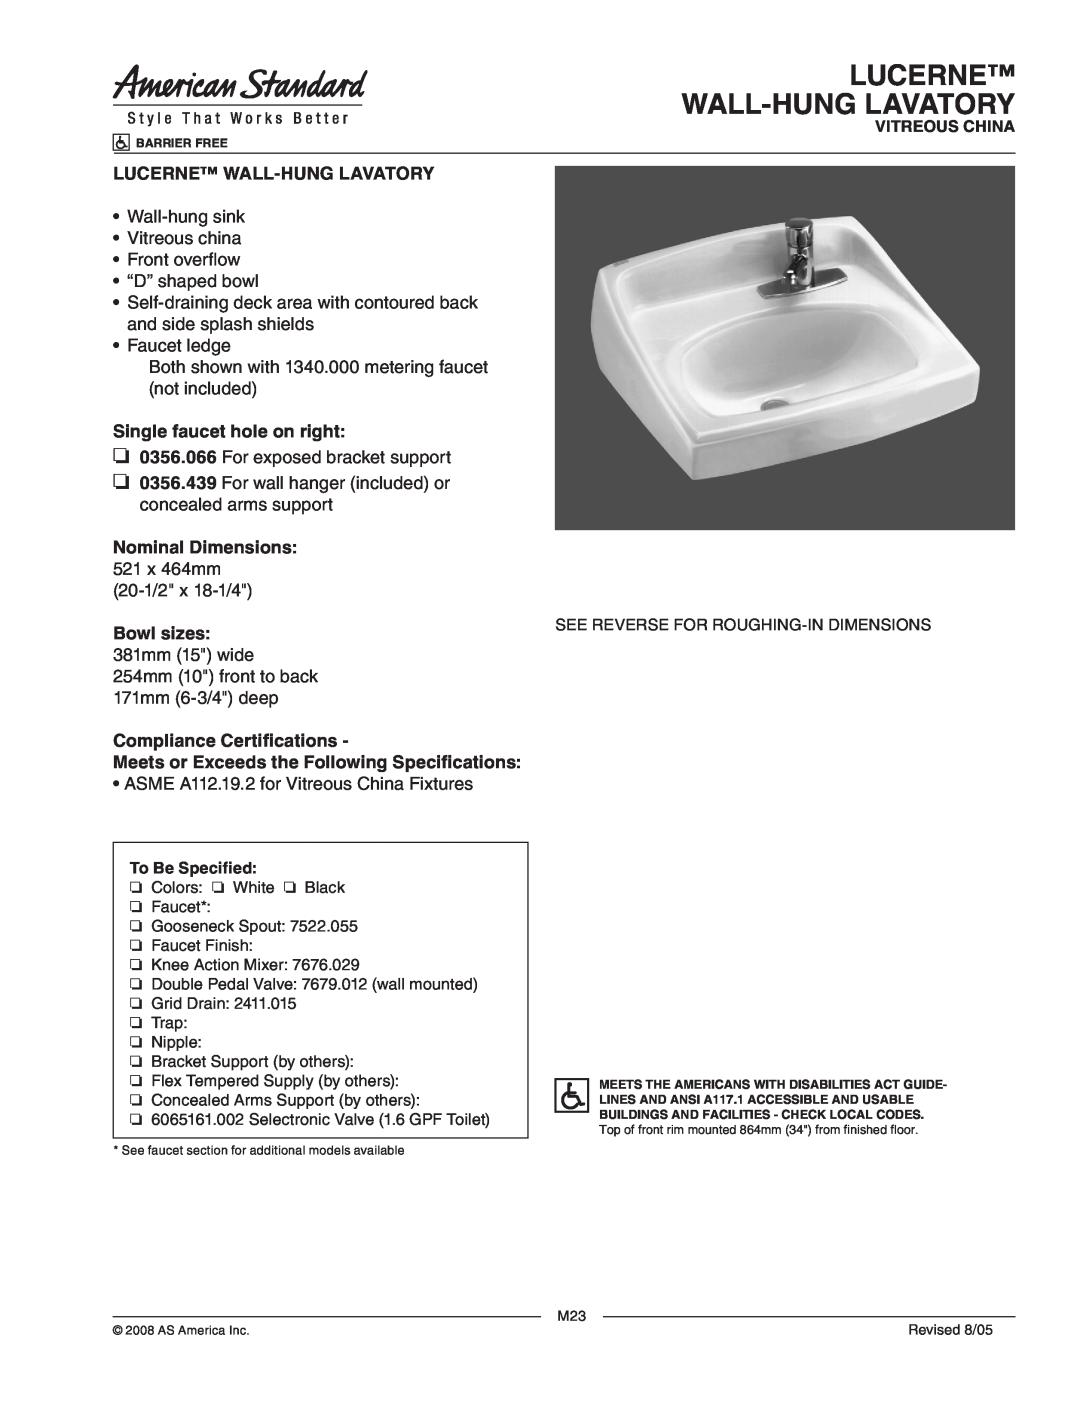 American Standard 0356.066, 0356.439 dimensions Lucerne Wall-Hunglavatory, Single faucet hole on right, Bowl sizes 